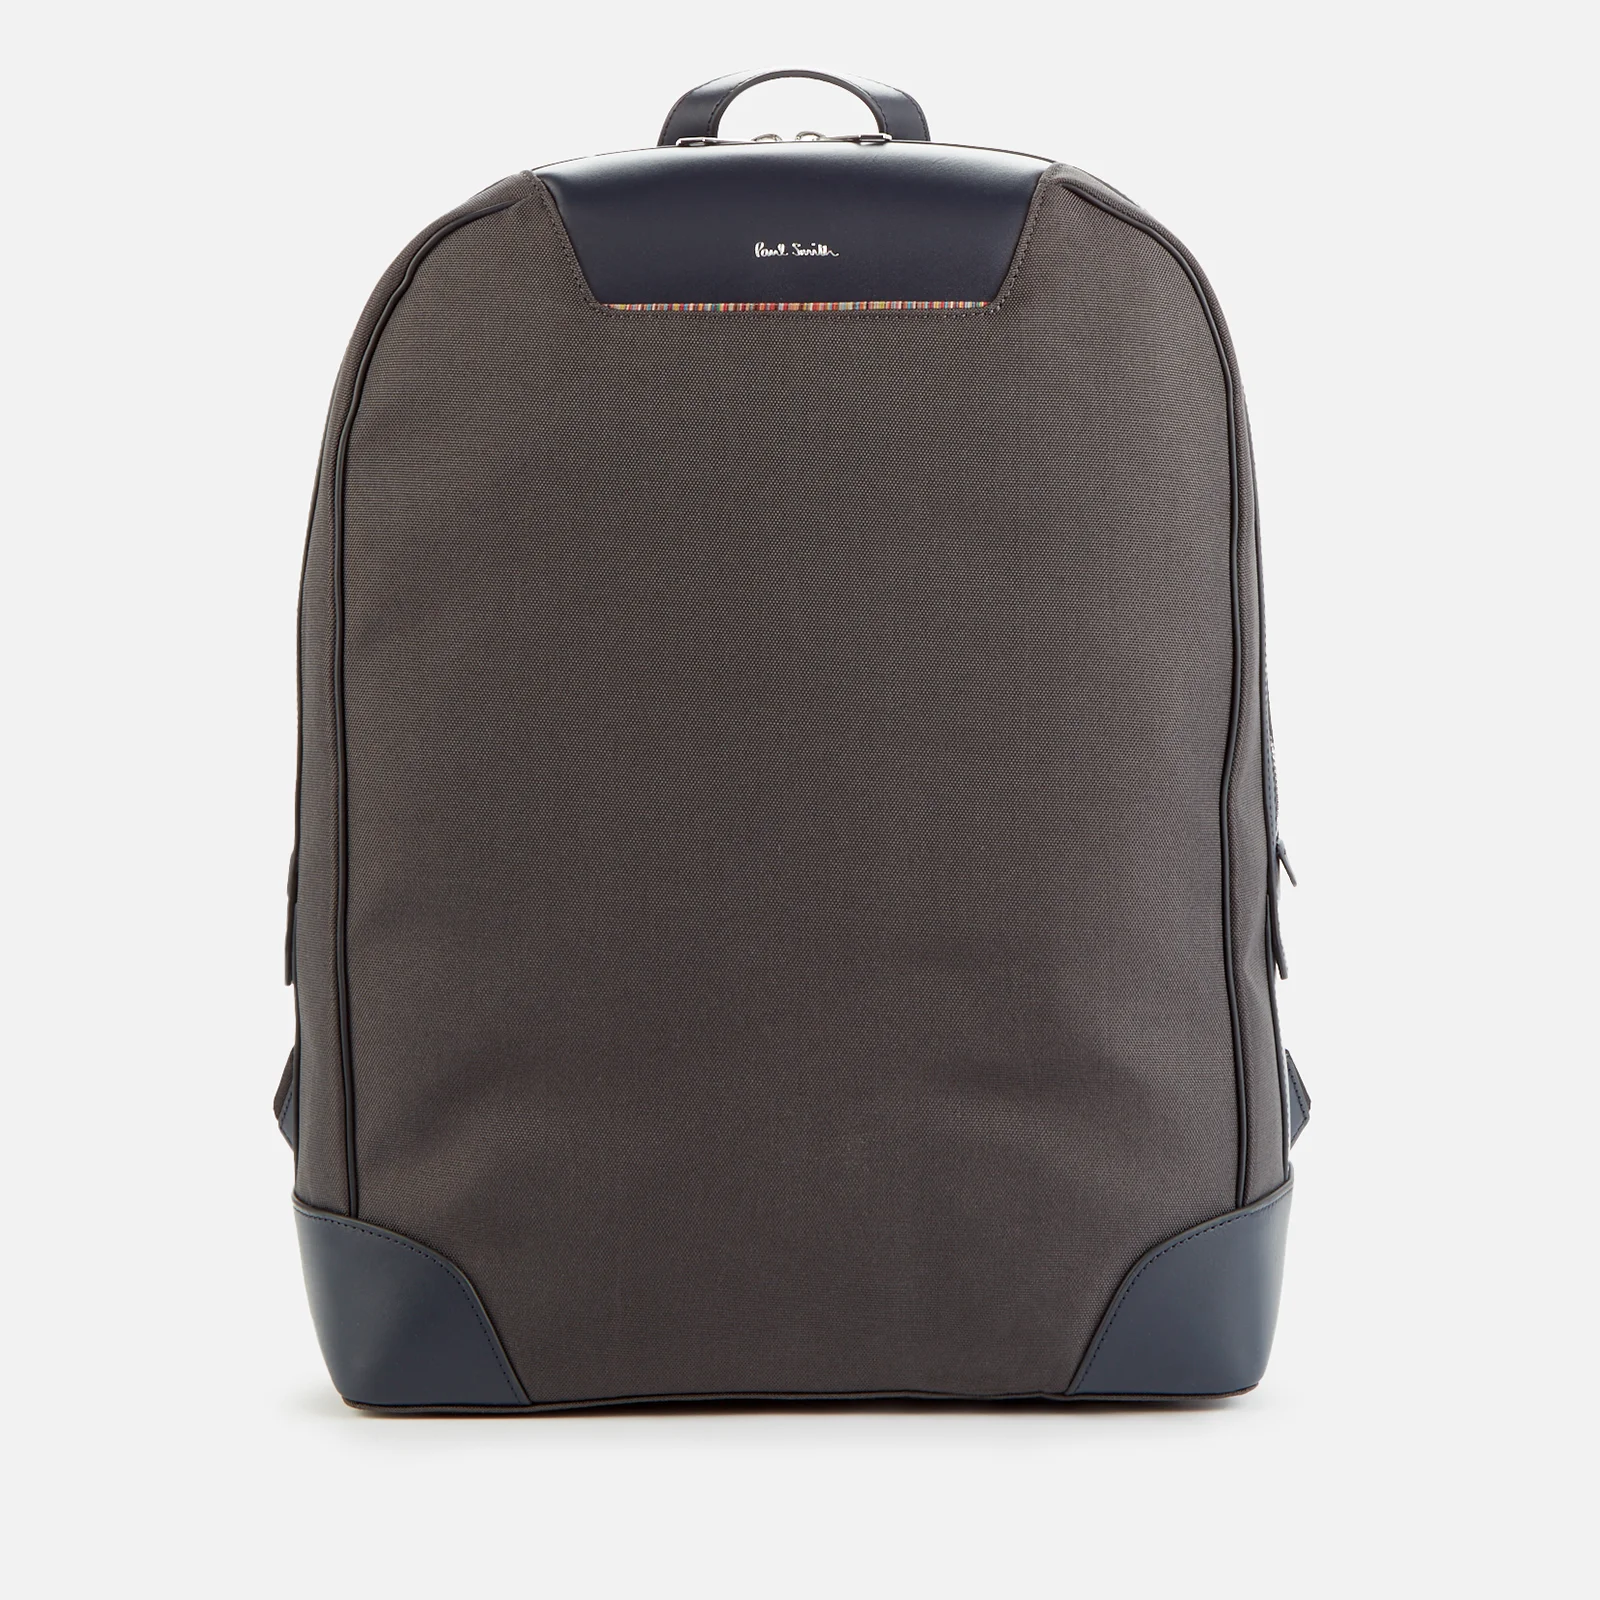 PS Paul Smith Men's Travel Backpack - Grey Image 1